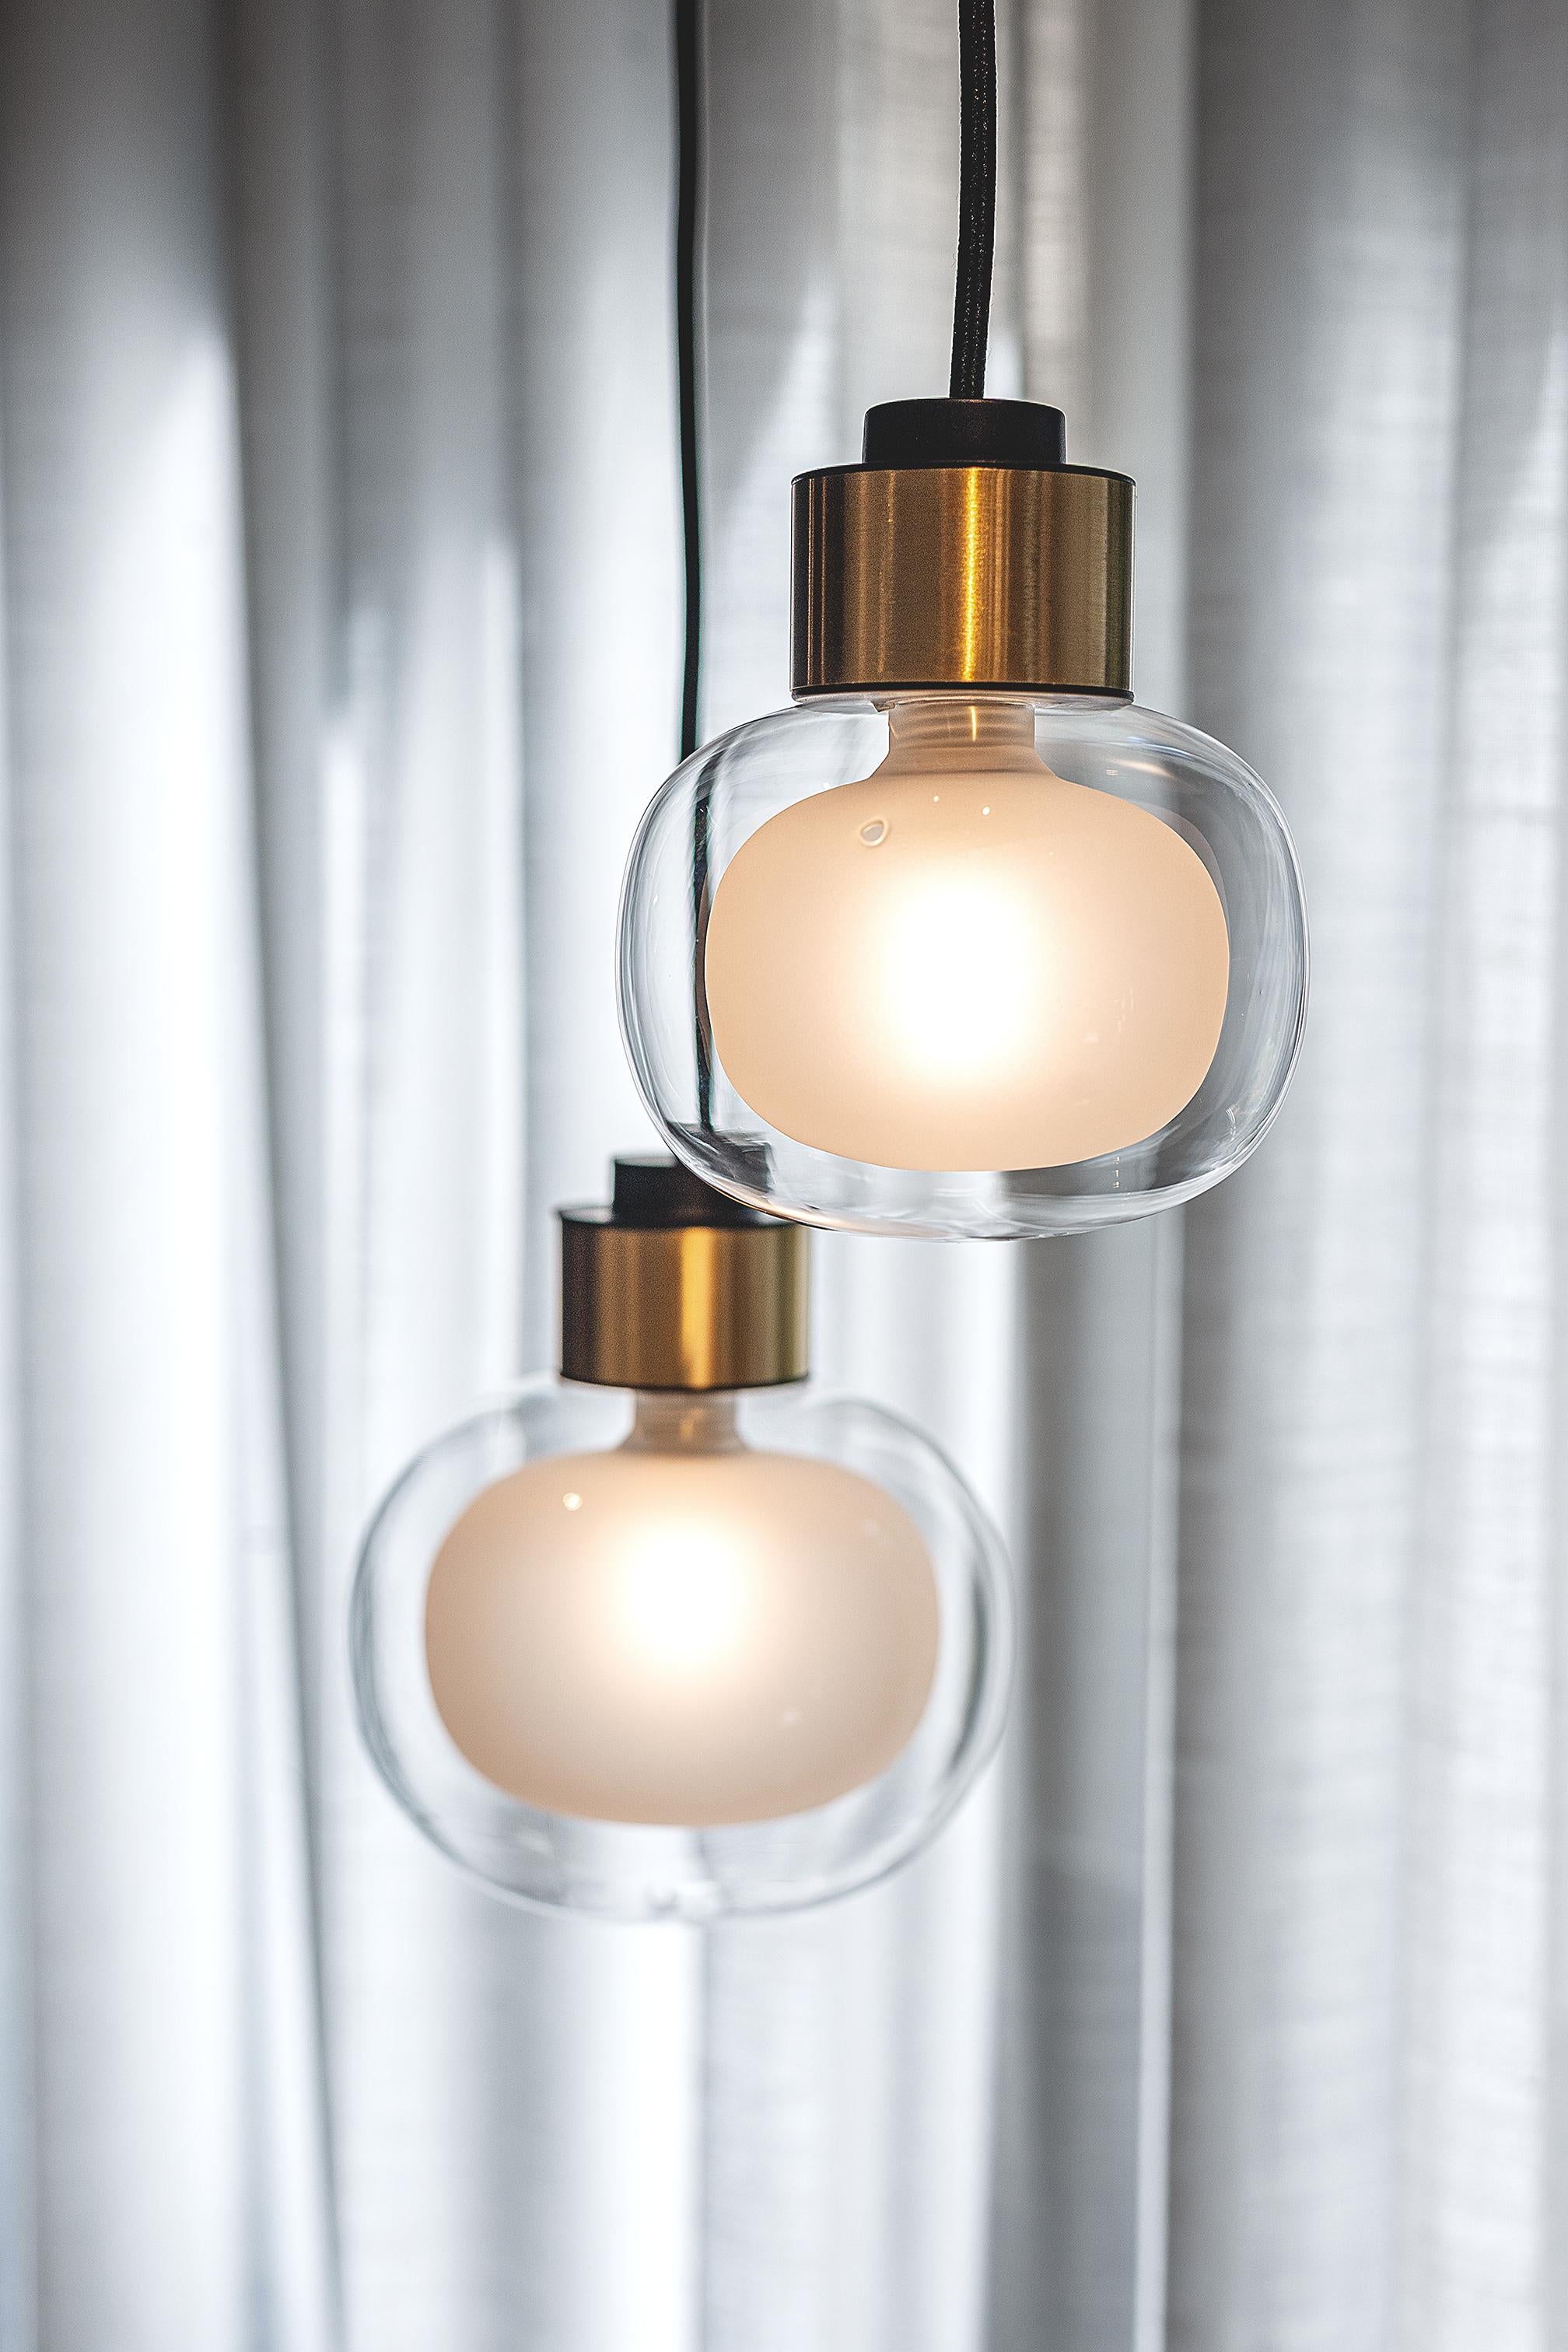 3 pendant lamps Nabila 552.21 by Corrado Dotti x TOOY
UL Listed 

Model shown:
Finish: Brushed brass
Color: Clear glass
Canopy: Ø 13 cm

Bulb compliance : G9 220/240V 3W Compliant with USA electric system


cable length 150 cm

50s inspired